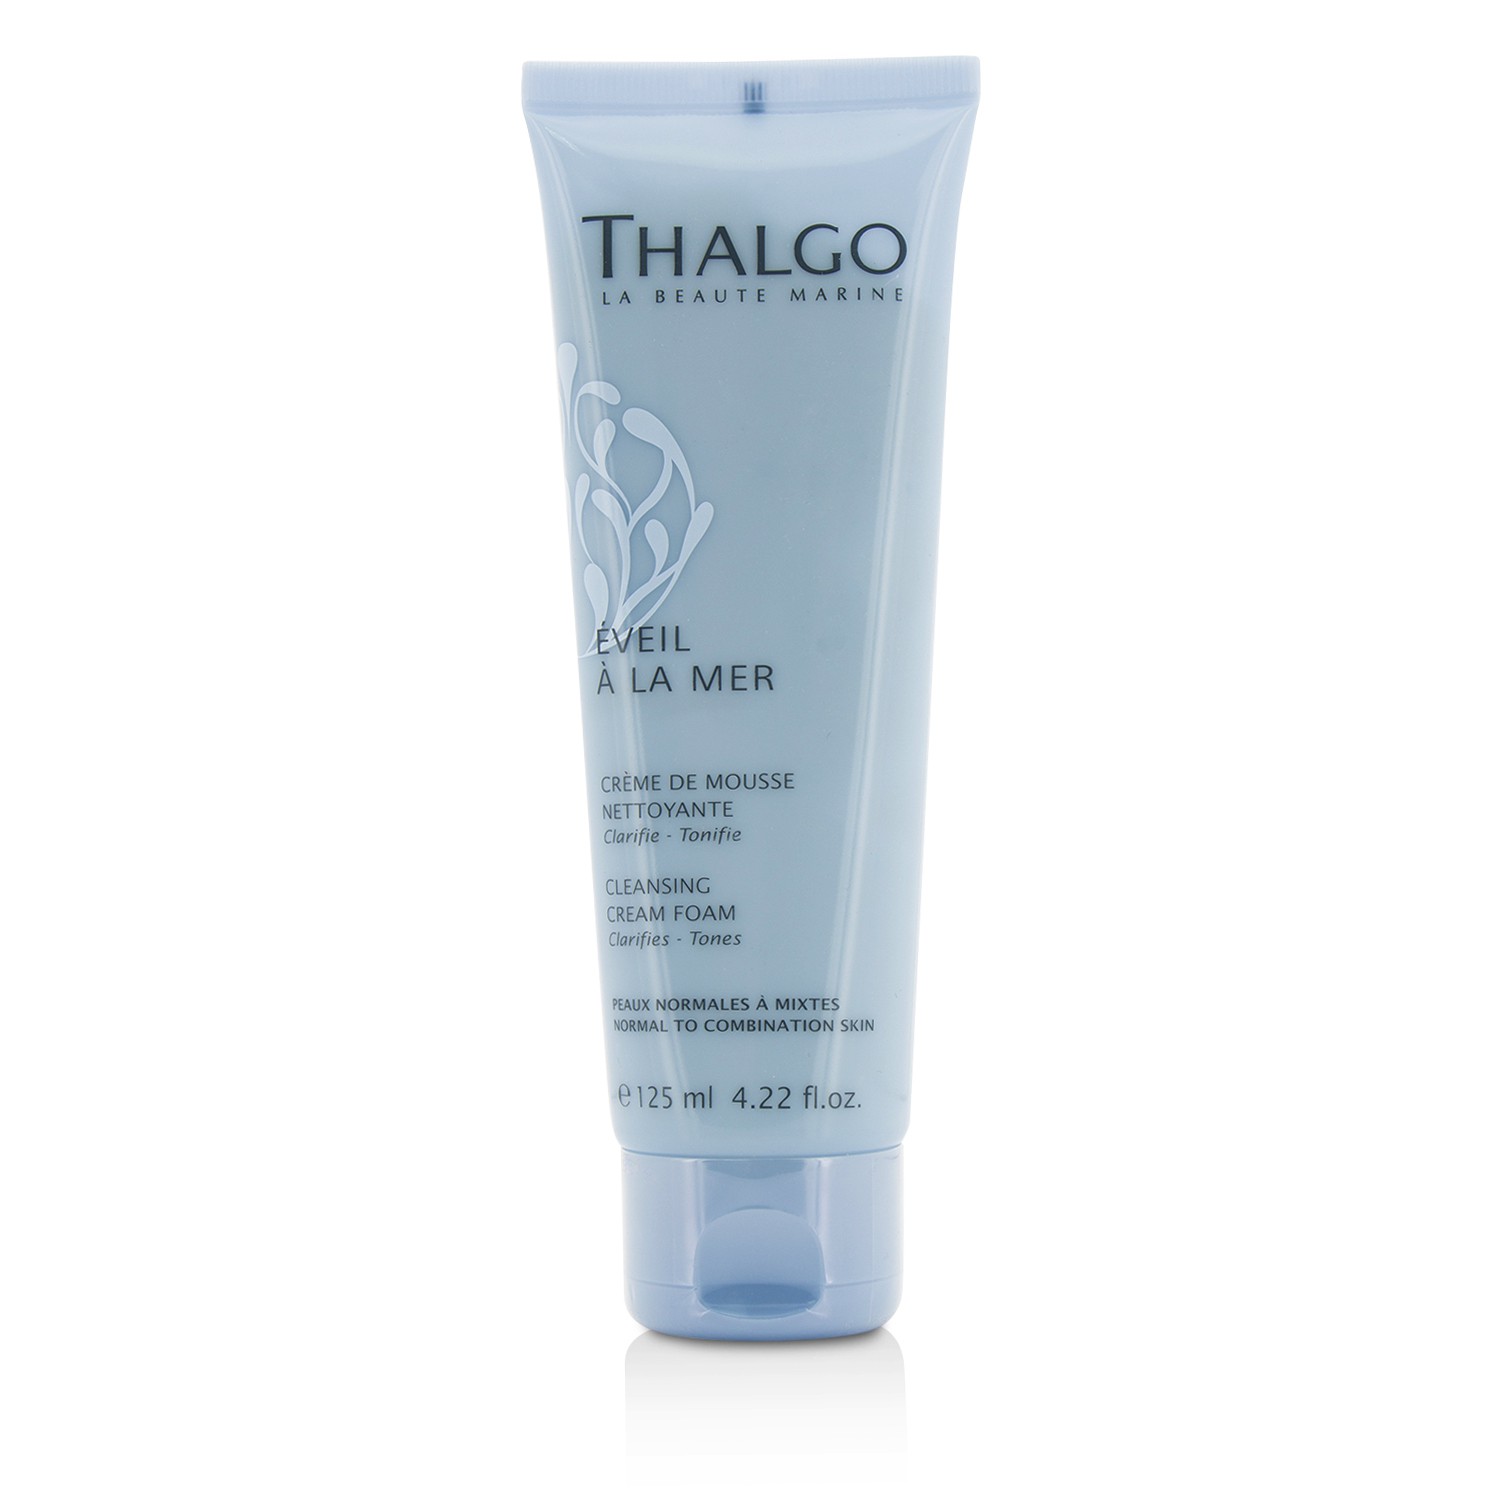 Eveil A La Mer Cleansing Cream Foam - For Normal to Combination Skin Thalgo Image